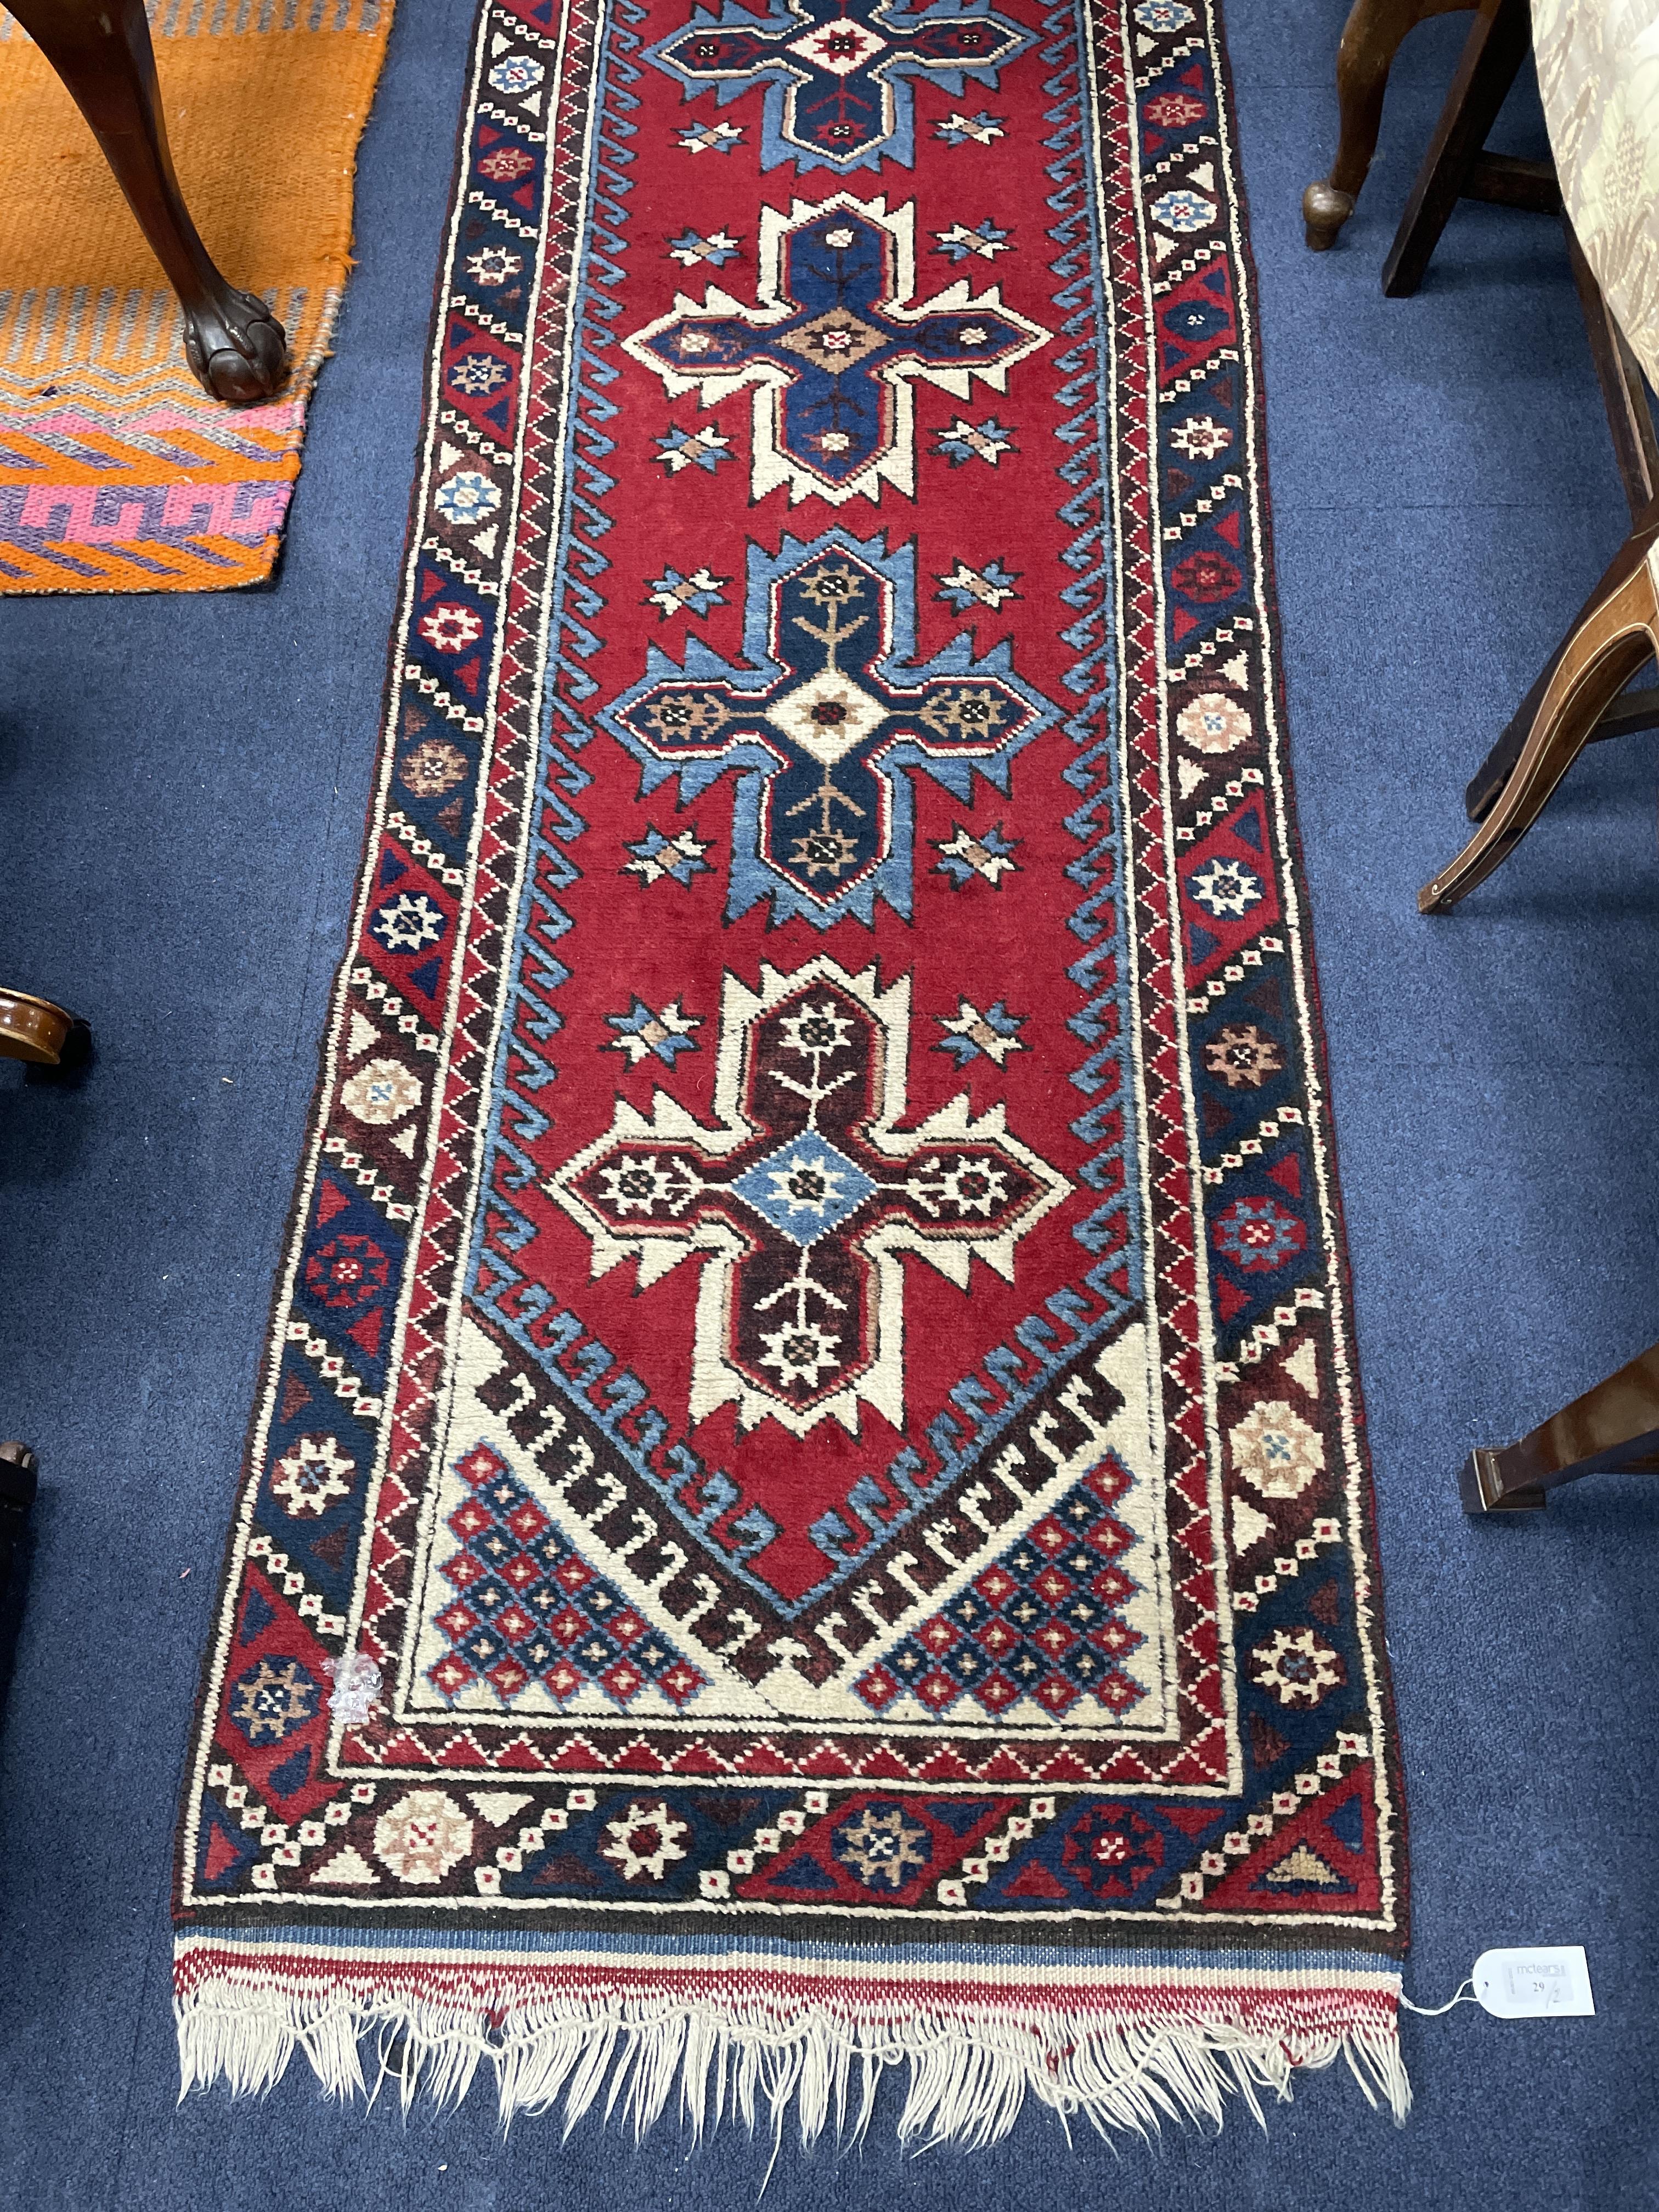 A MIDDLE EASTERN FRINGED AND BORDERED RUNNER AND A RUG - Image 2 of 4